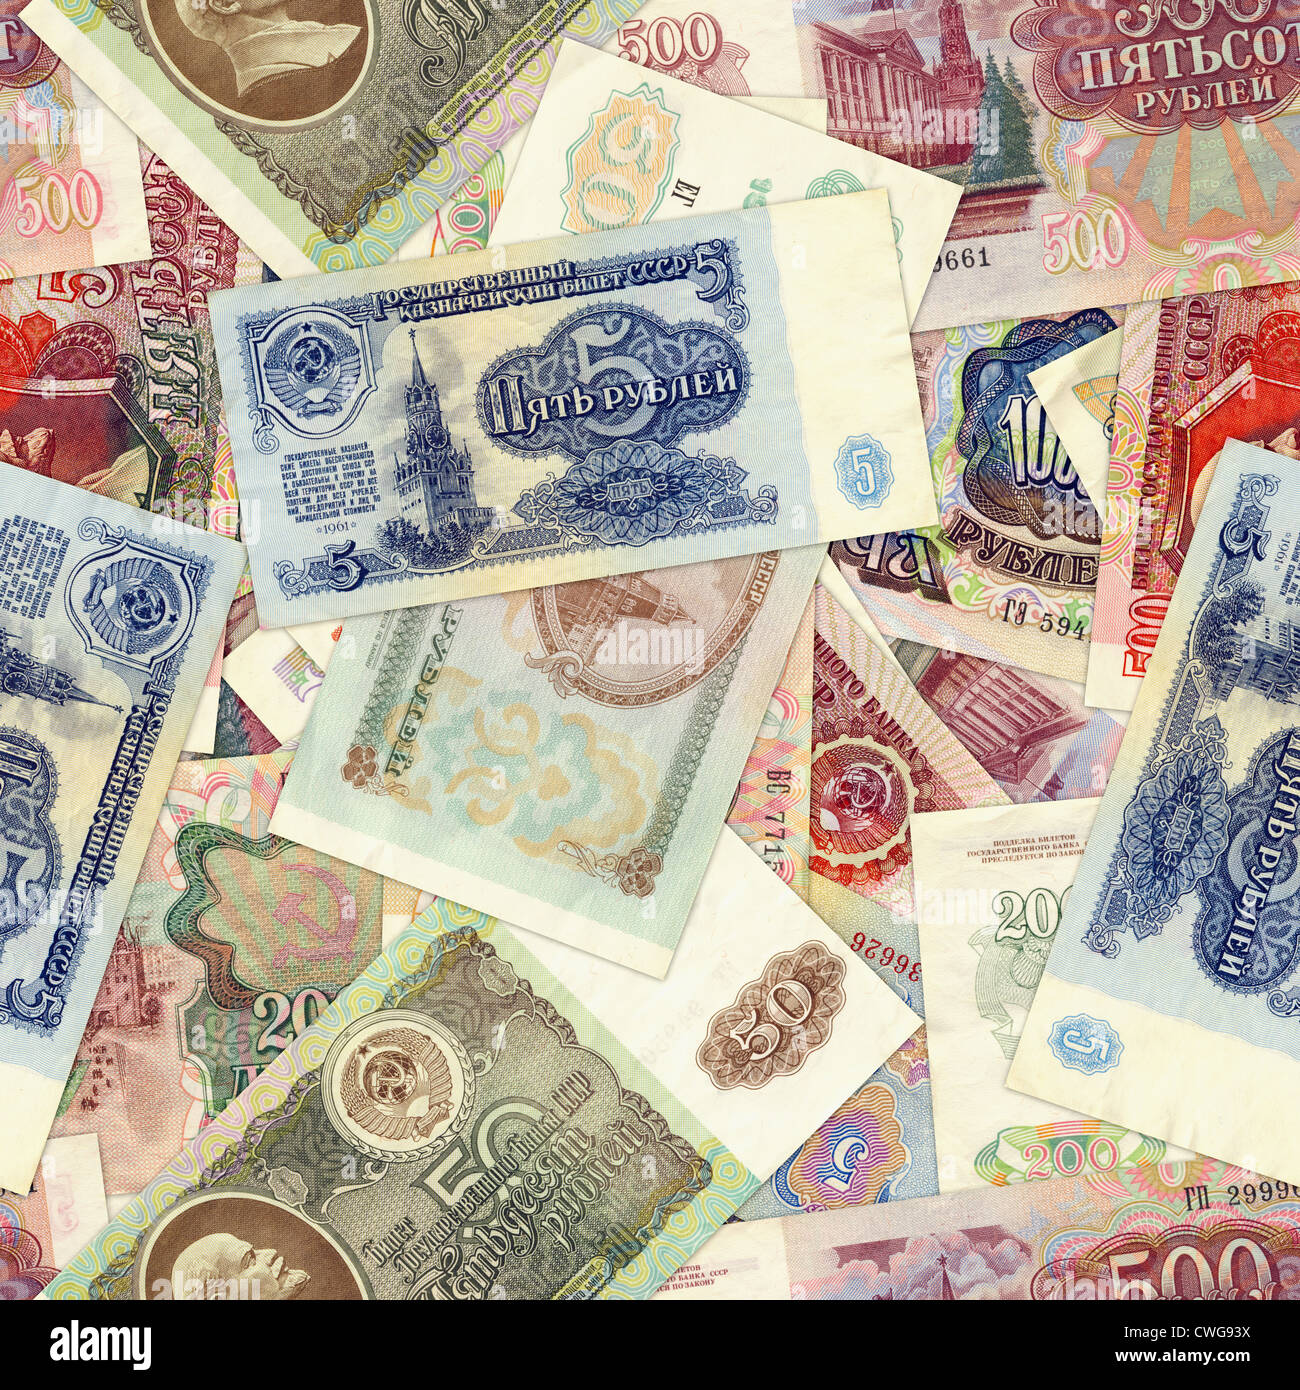 Money background - obsolete old Soviet banknotes - rubles Stock Photo